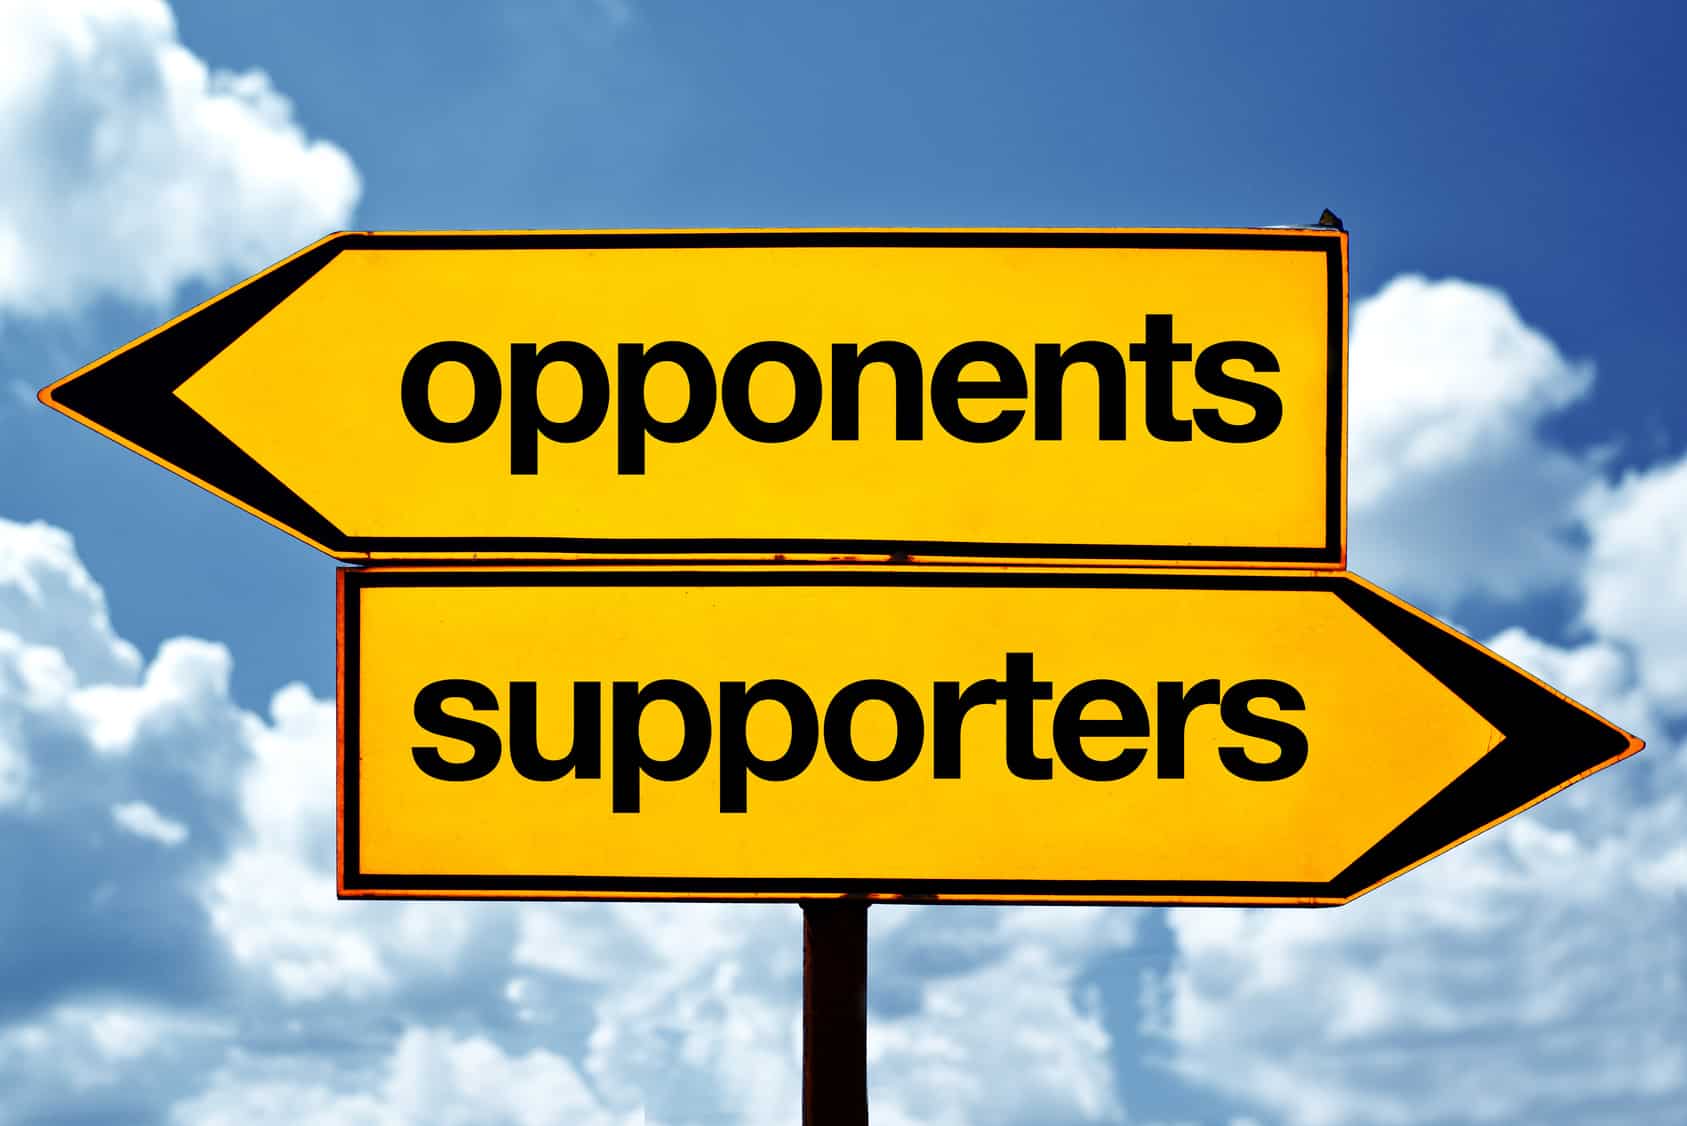 Opponents or supporters